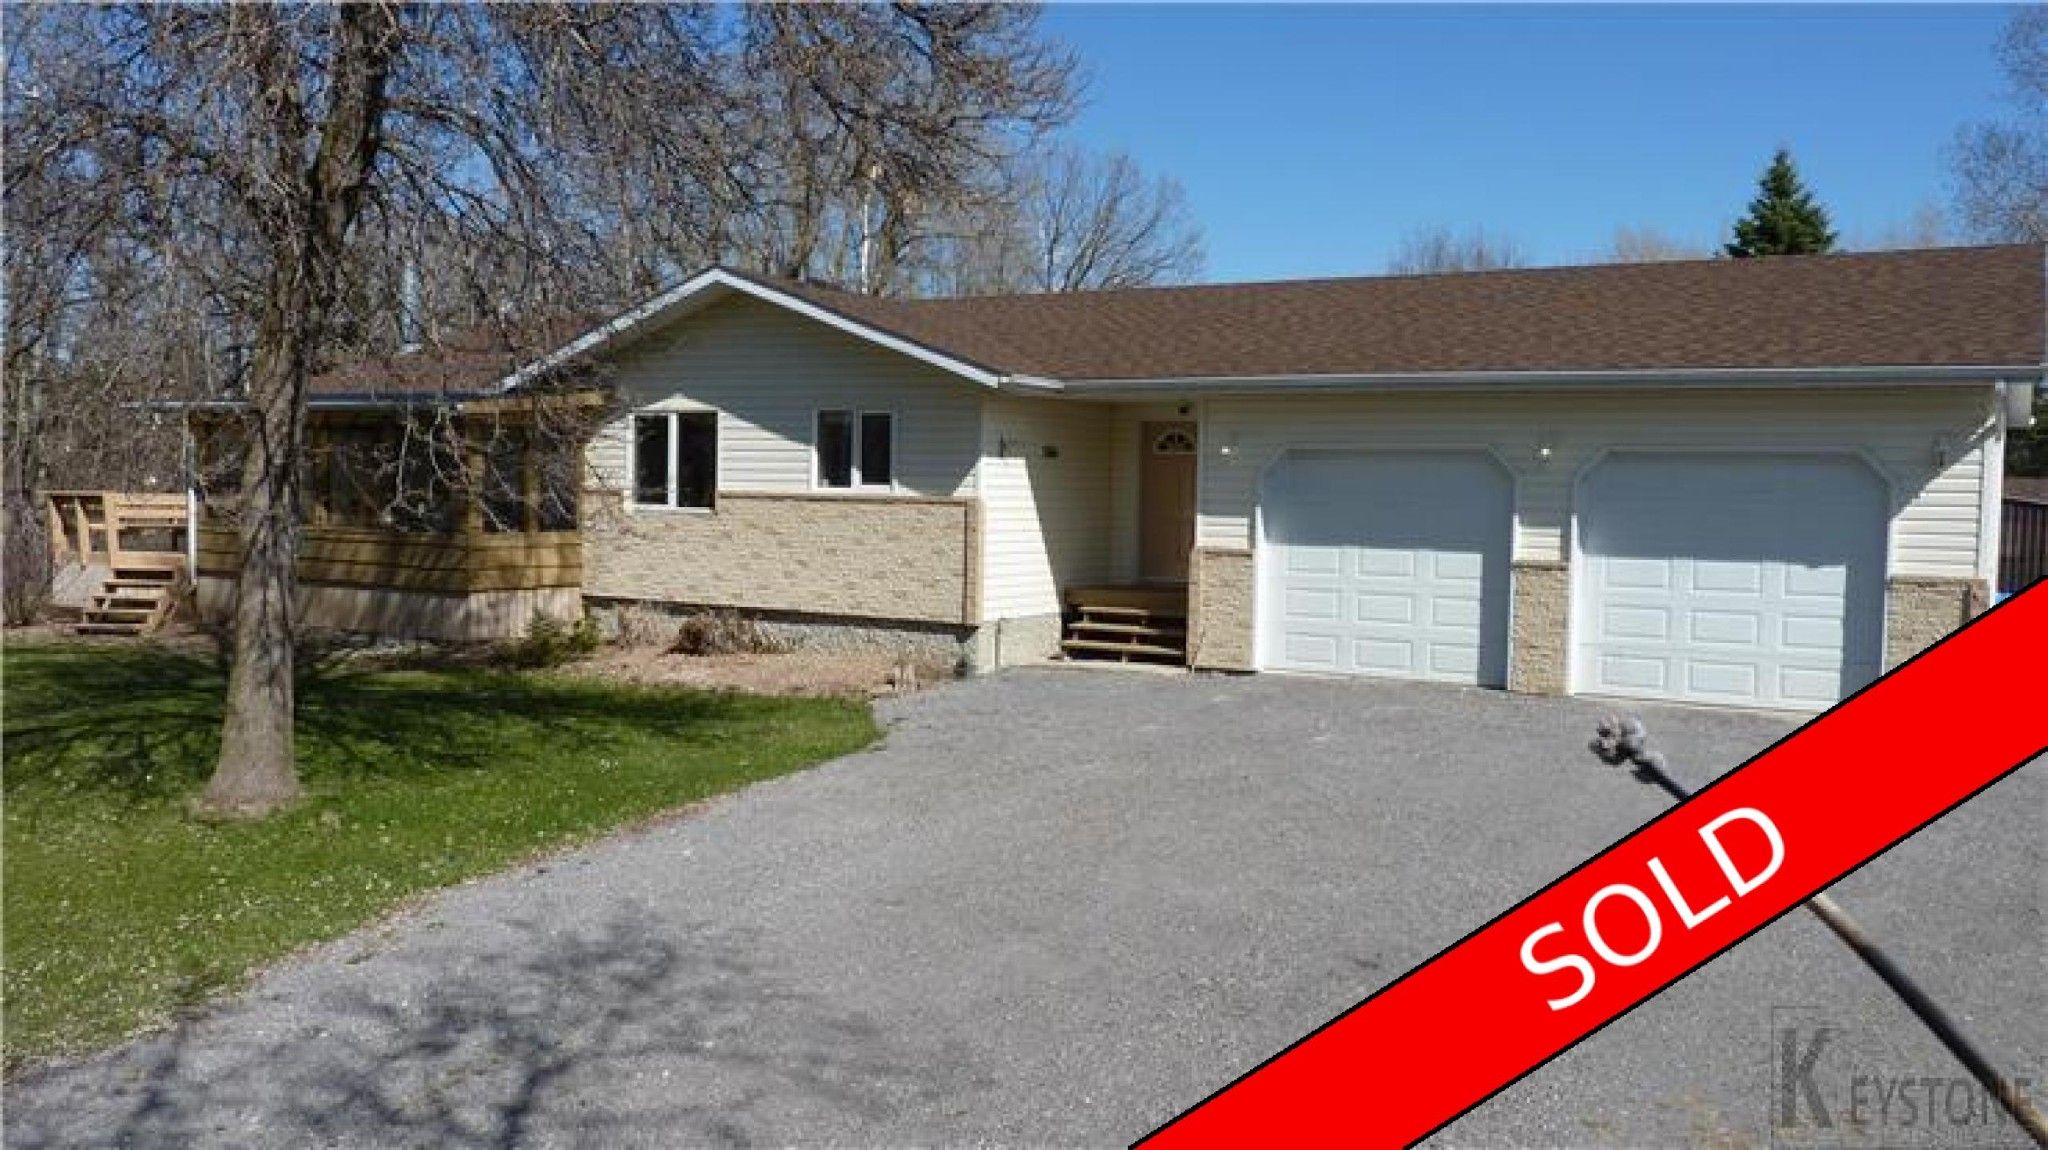 Main Photo: 1430 Breezy Point Road in St Andrews, MB R1A2A7: House for sale : MLS®# 1709949